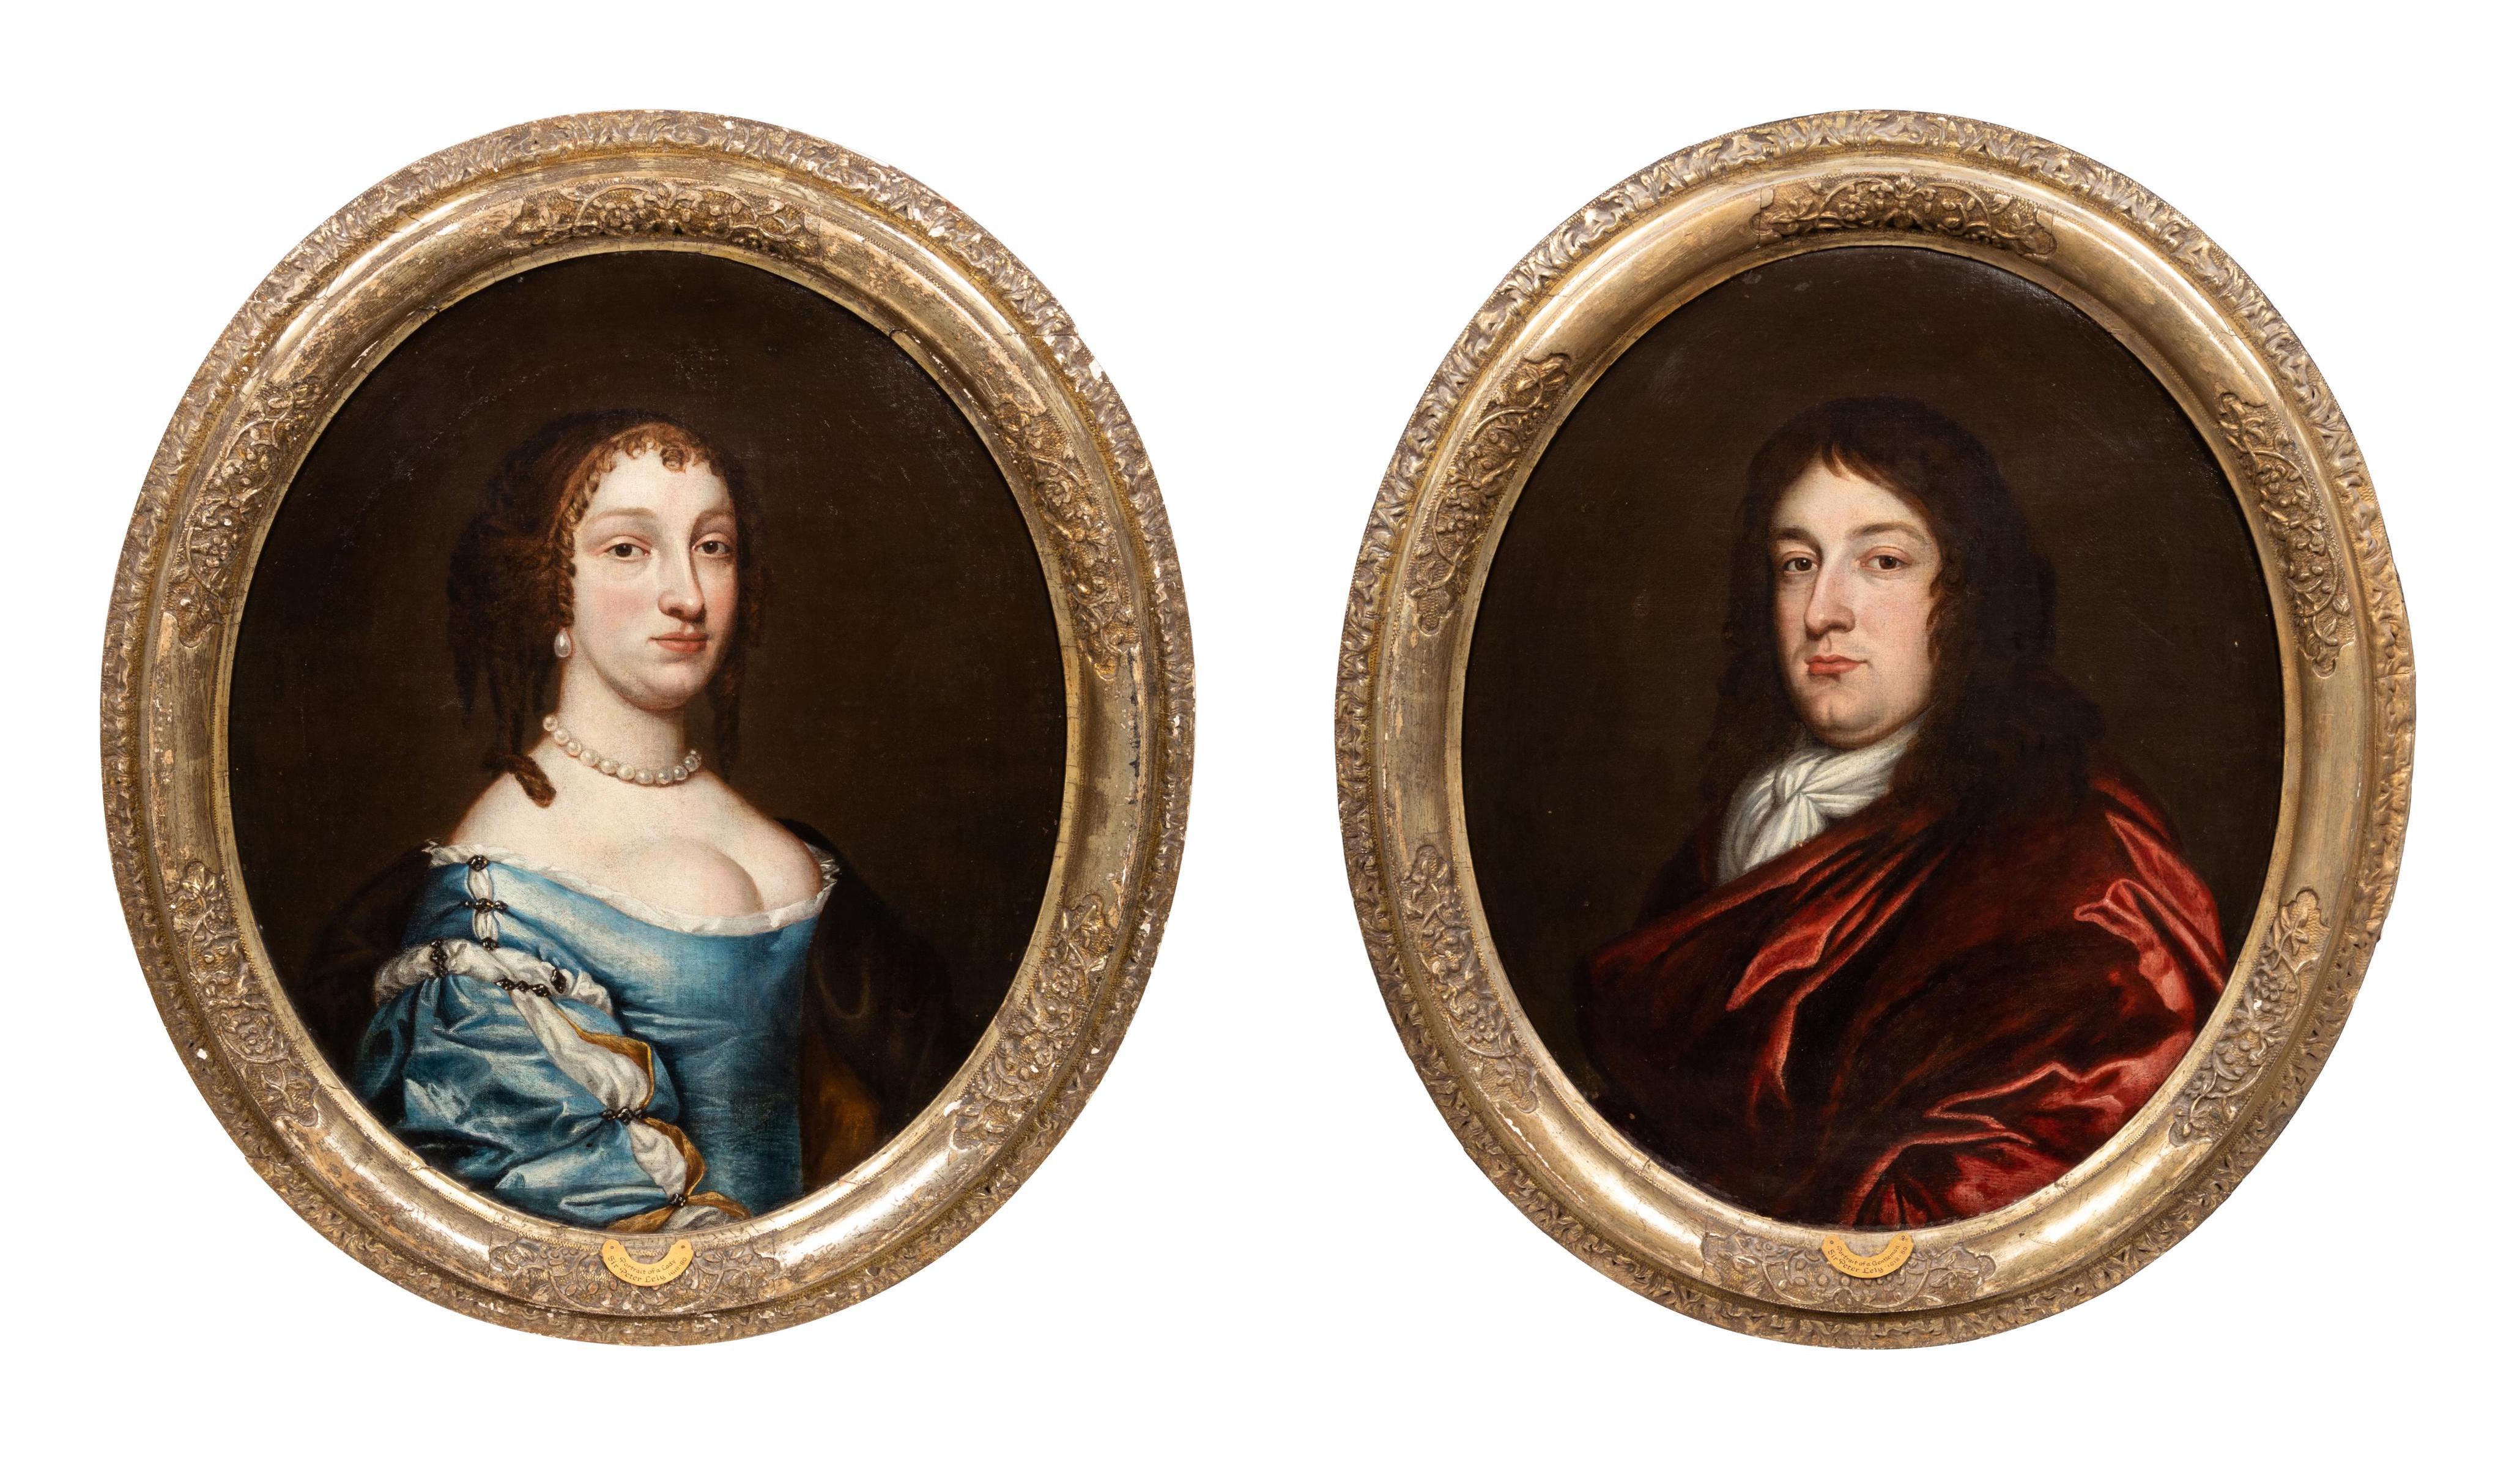 Pair of Oval period portraits, Circle of Sir Peter Lely (1618-1680)
Antique gold leaf Oval frames.

Sir Peter Lely (1618-1680)

Lely was born Pieter van der Faes to Dutch parents in Soest, Westphalia, on 14 September 1618, the son of Johan van der